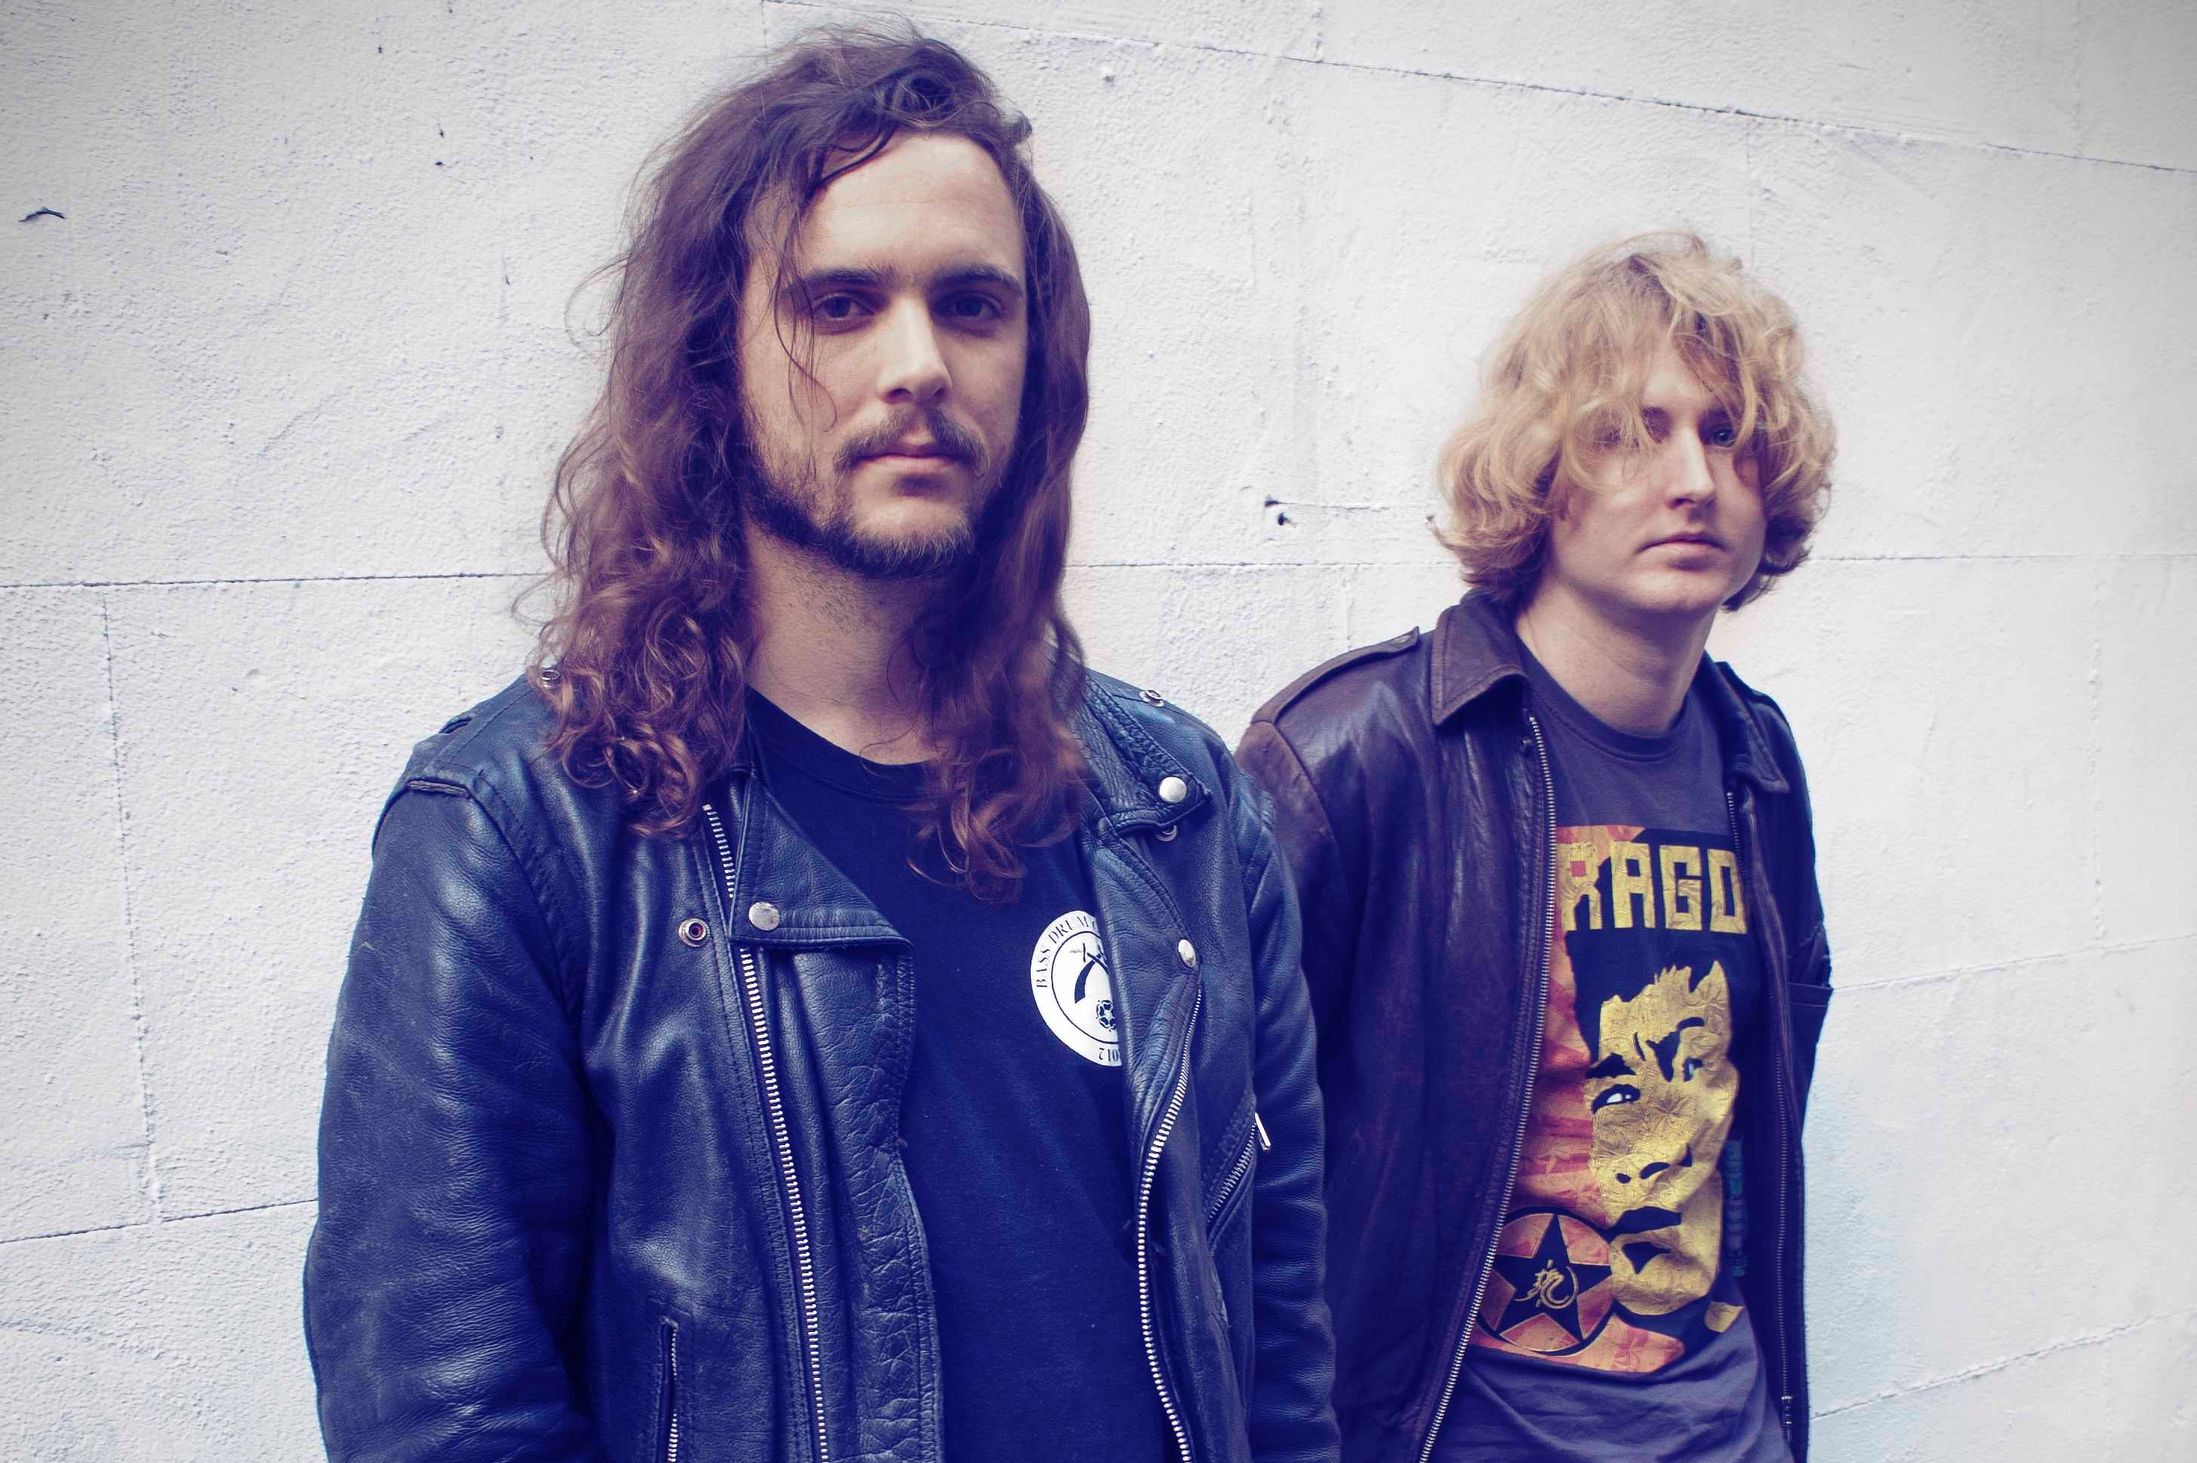 Interview: DZ Deathrays. On Northern Lights, Grossed Out 